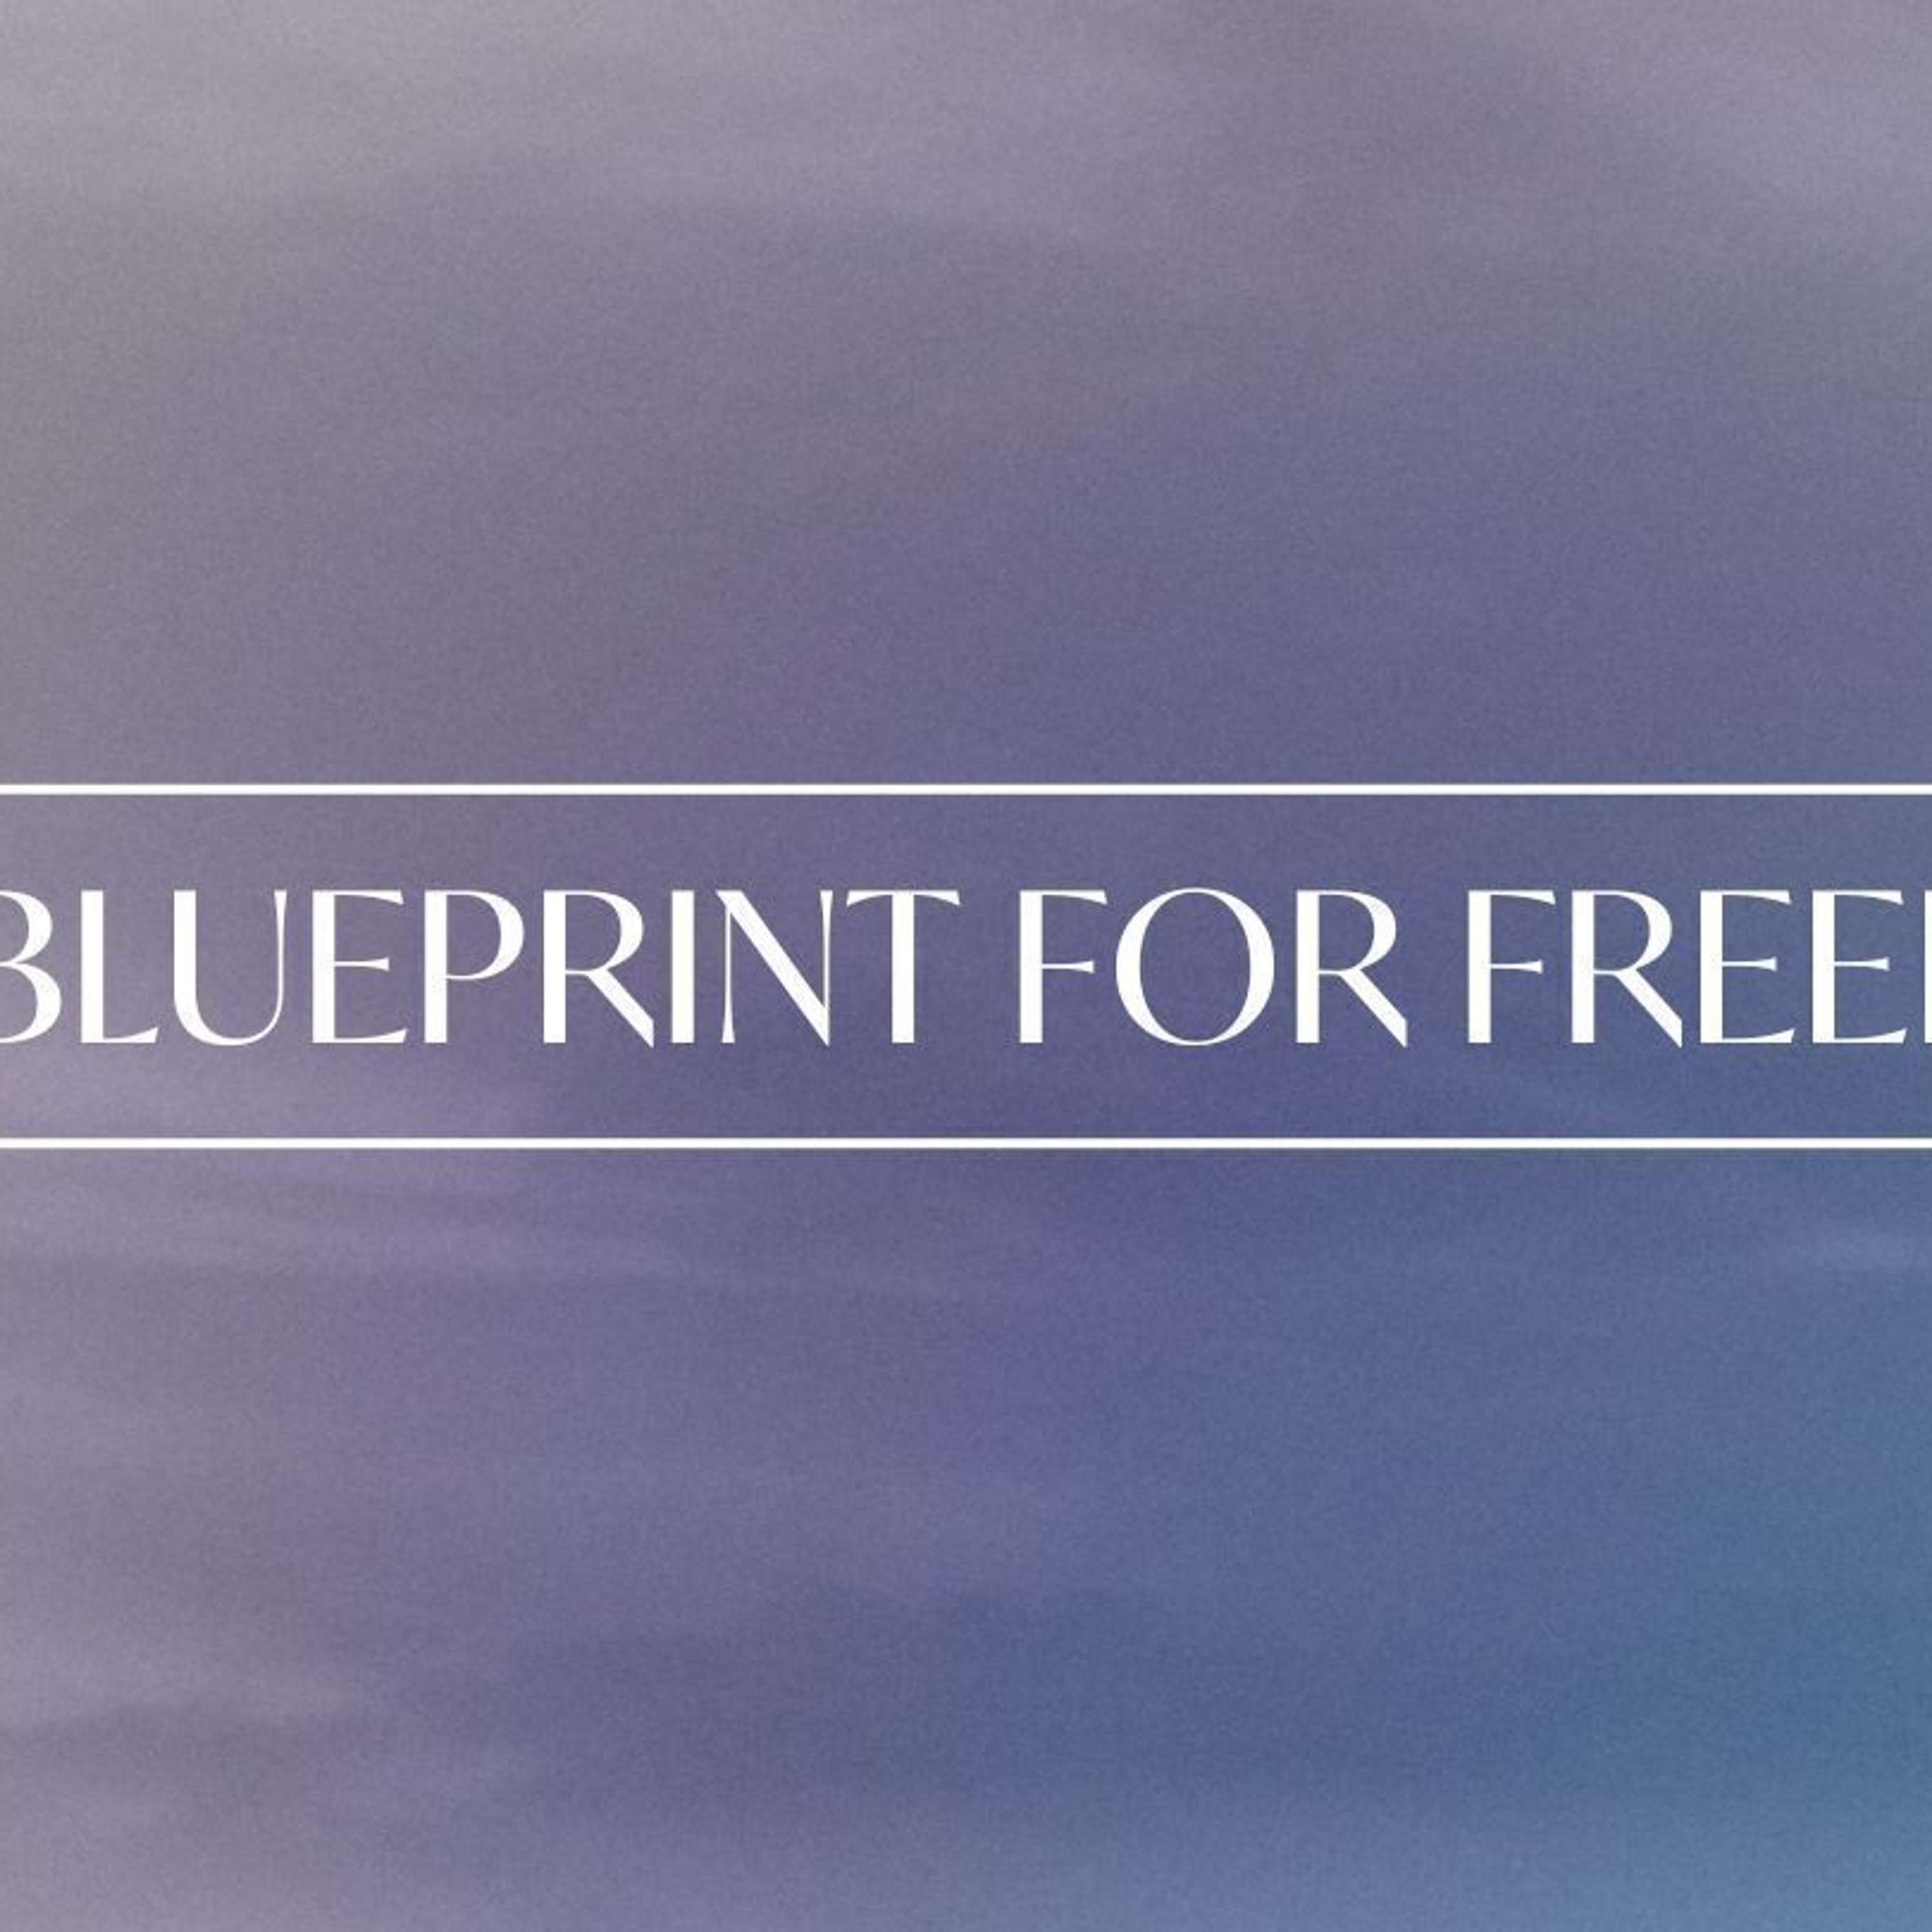 The Blueprint for Freedom: Two Questions from God